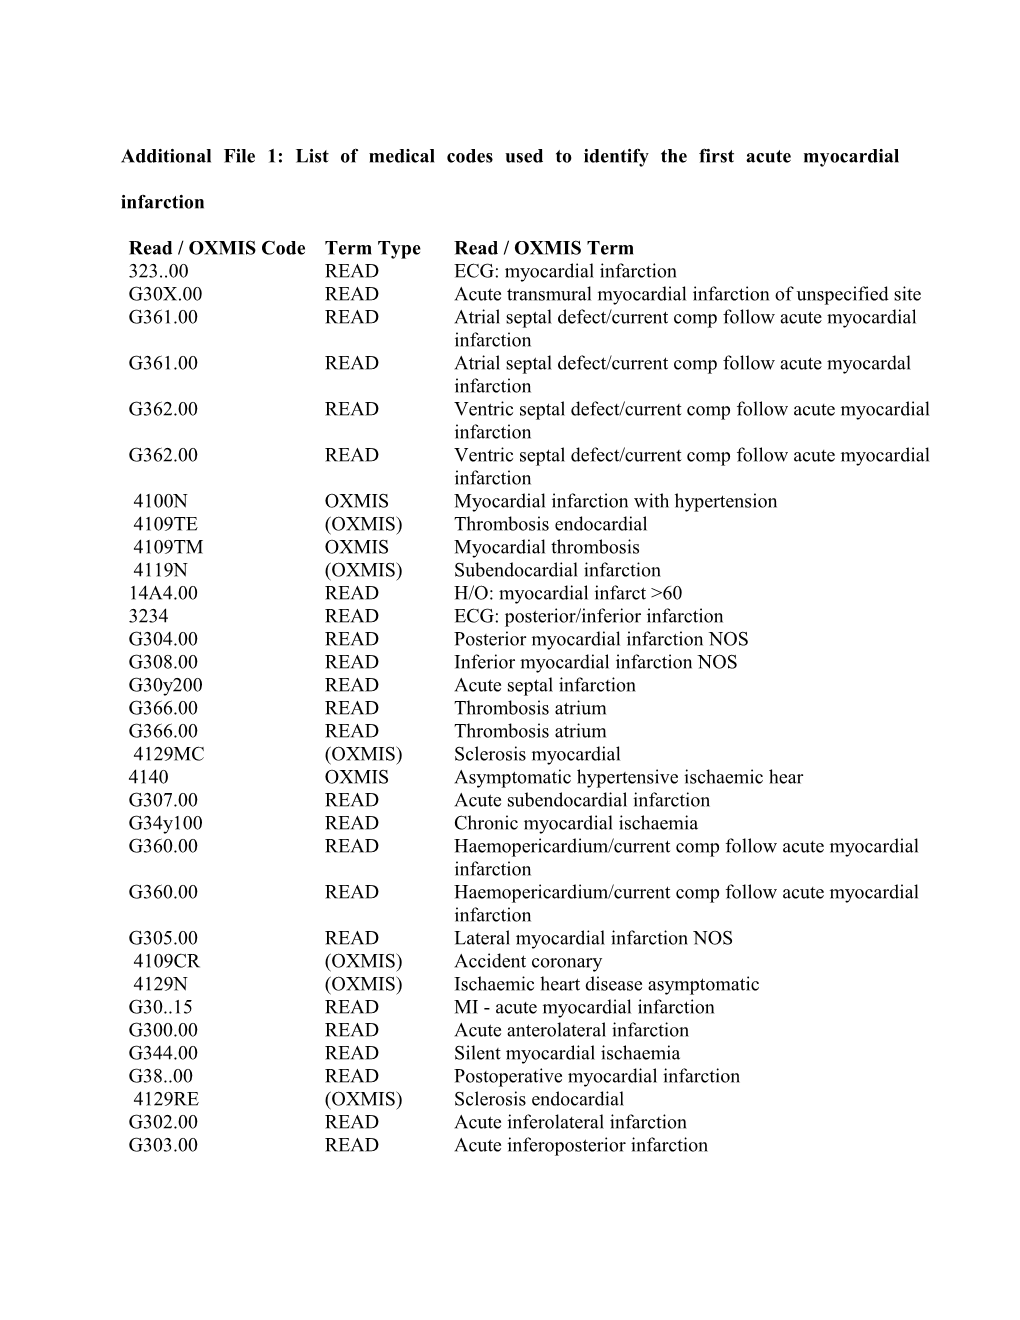 Additional File 2: List of Medical Codes Used to Identify the First Acute Myocardial Infarction